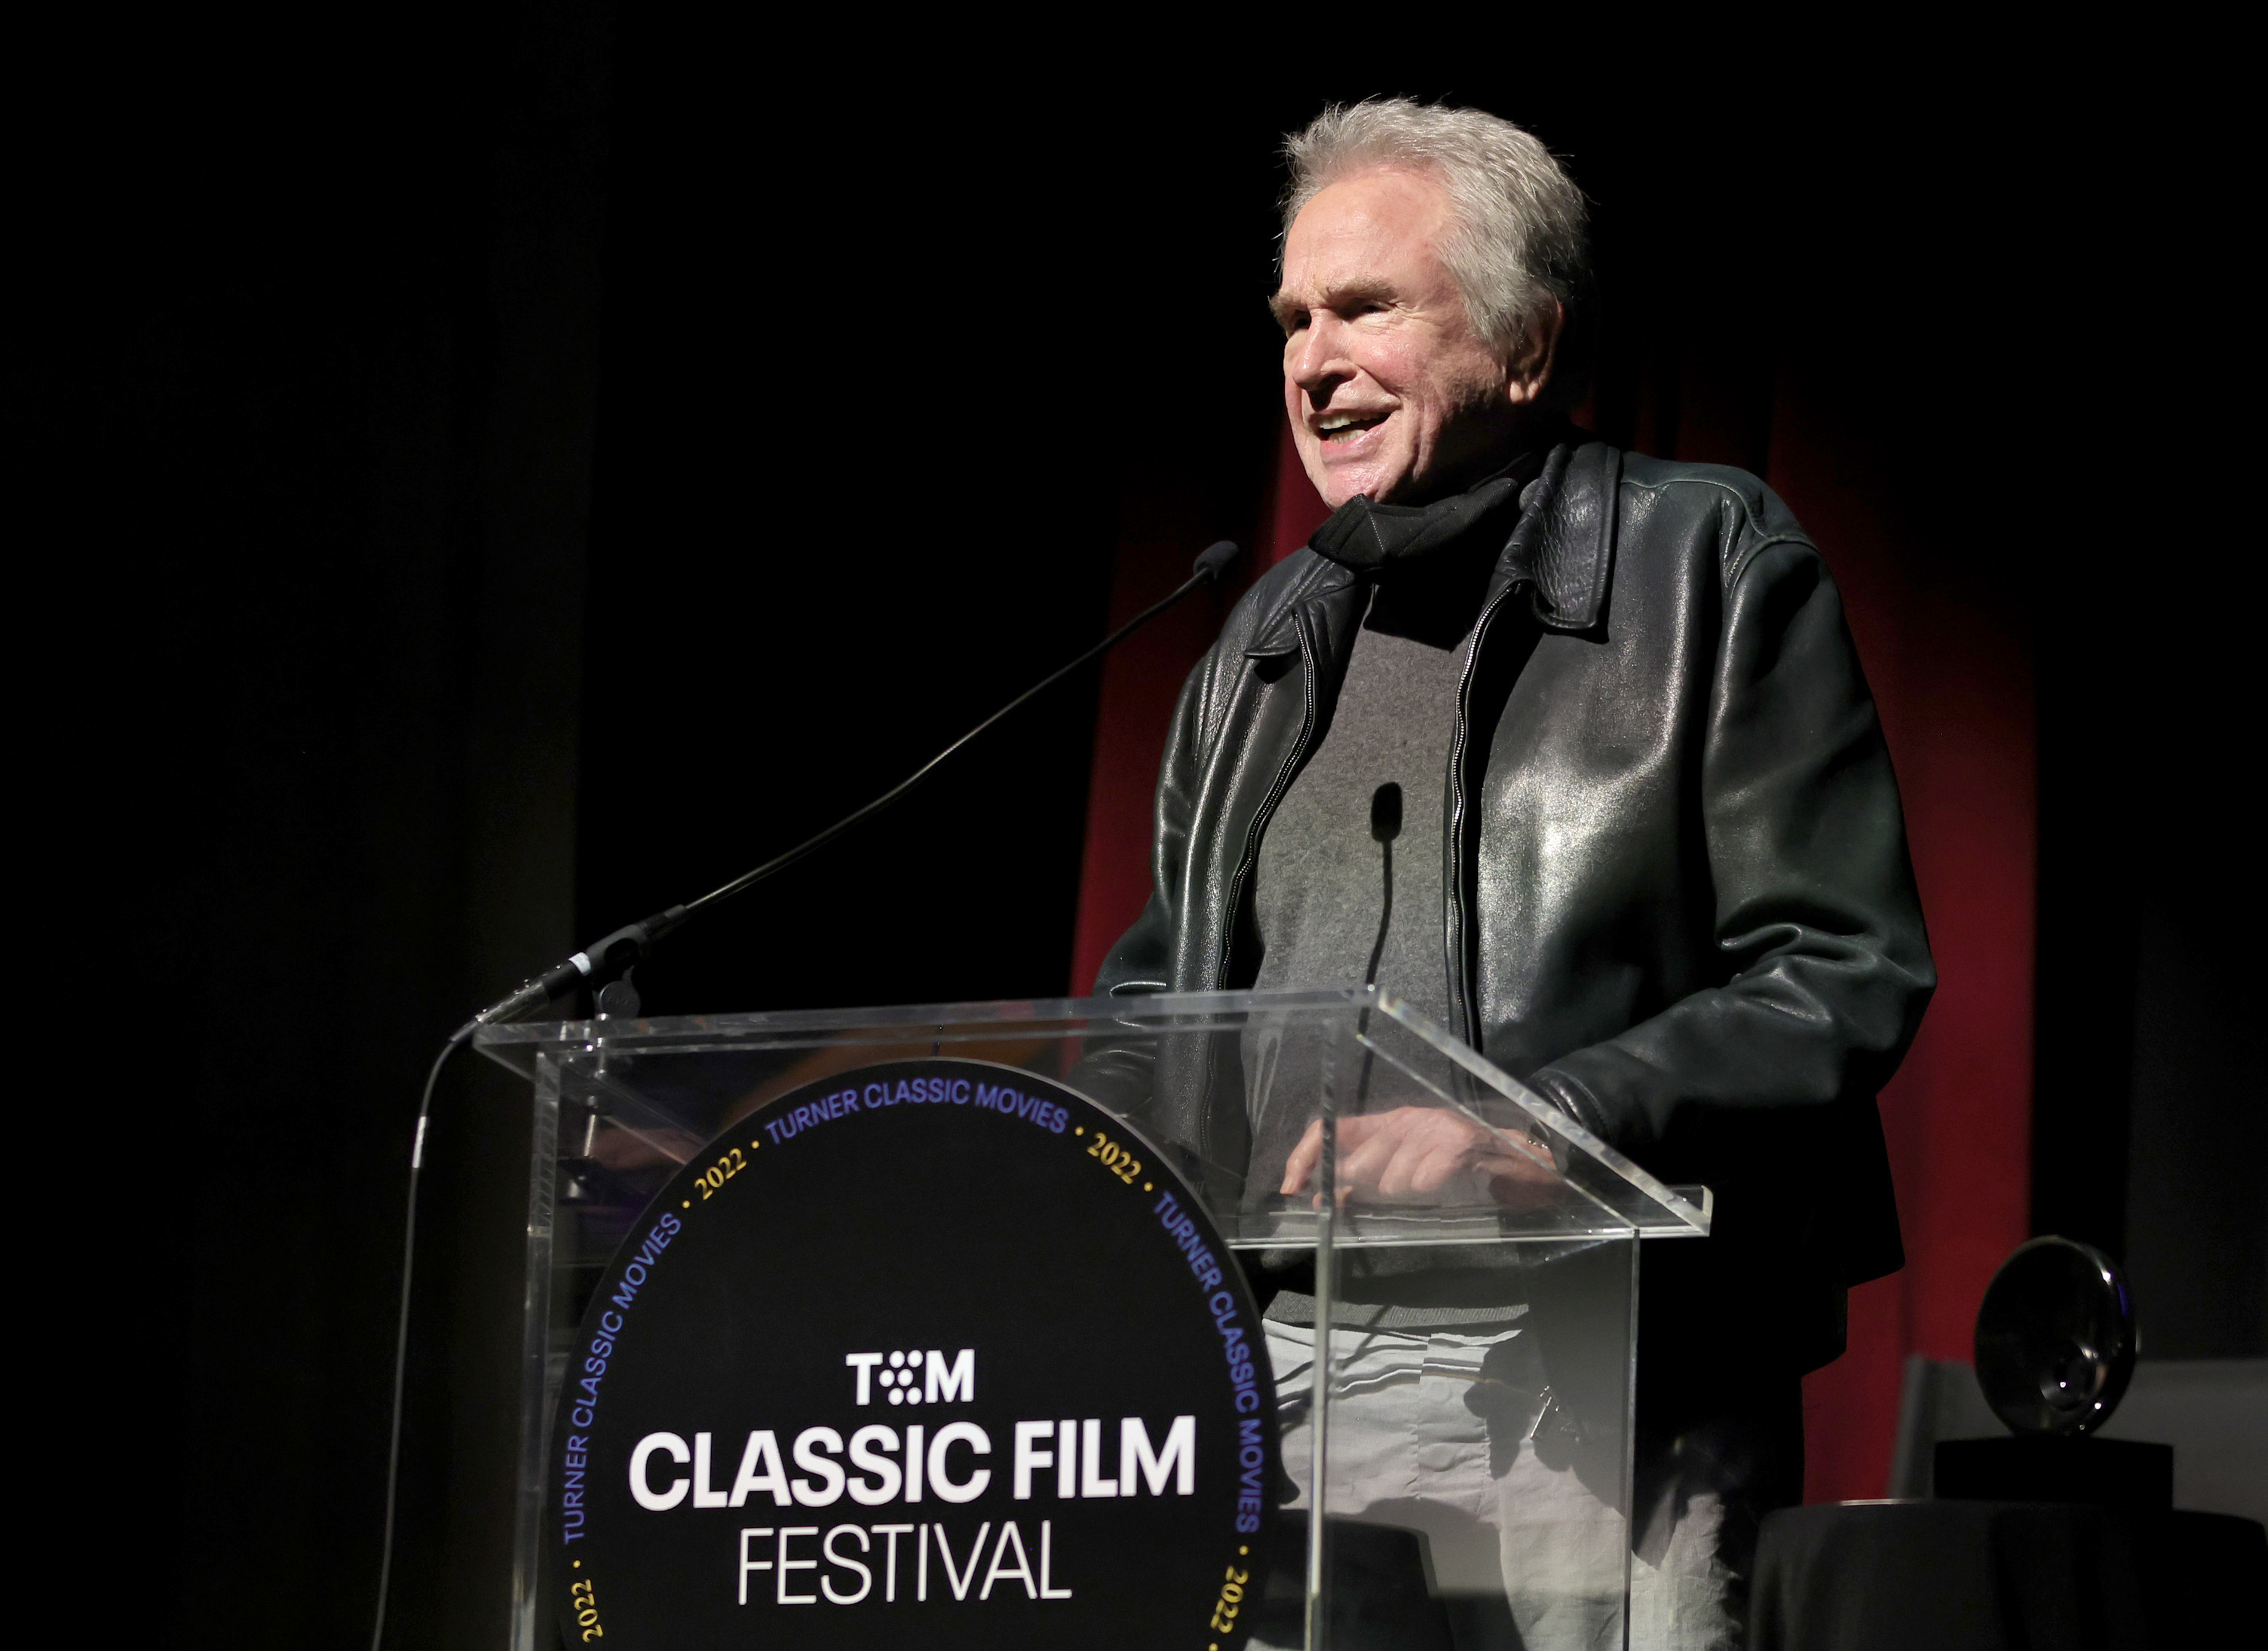 Special guest Warren Beatty speaks onstage at the screening of "Counsellor at Law during the 2022 TCM Classic Film Festival at the Hollywood Legion Theater on April 23, 2022.